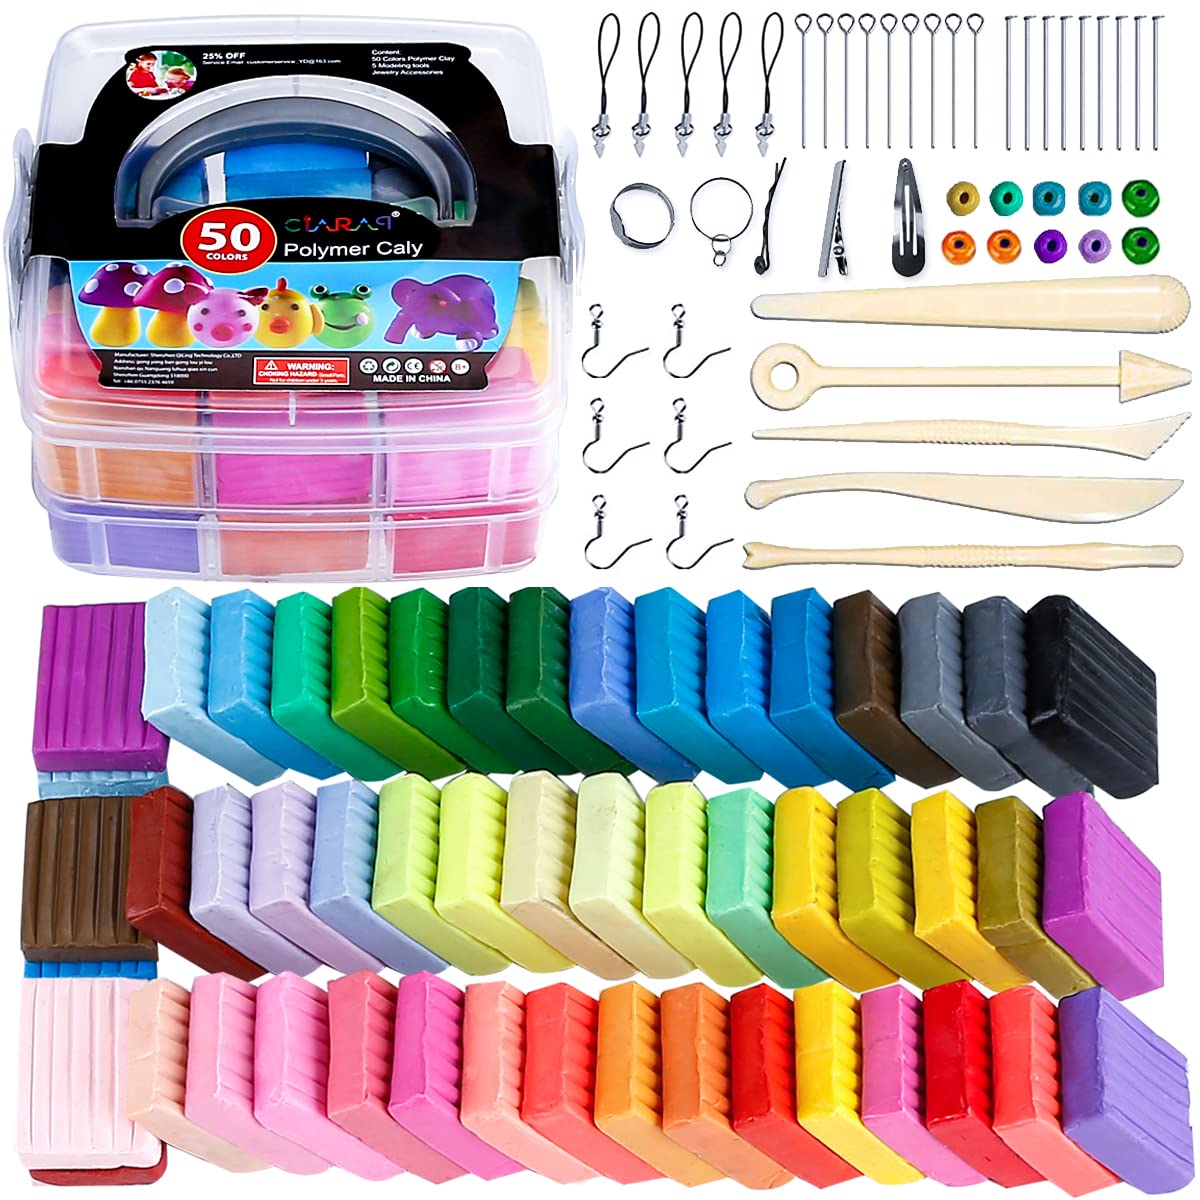 CiaraQ Polymer Clay-Oven Baked Modeling Clay with Sculpting Tools 50 Colors  3.41 lbs 50 Colors